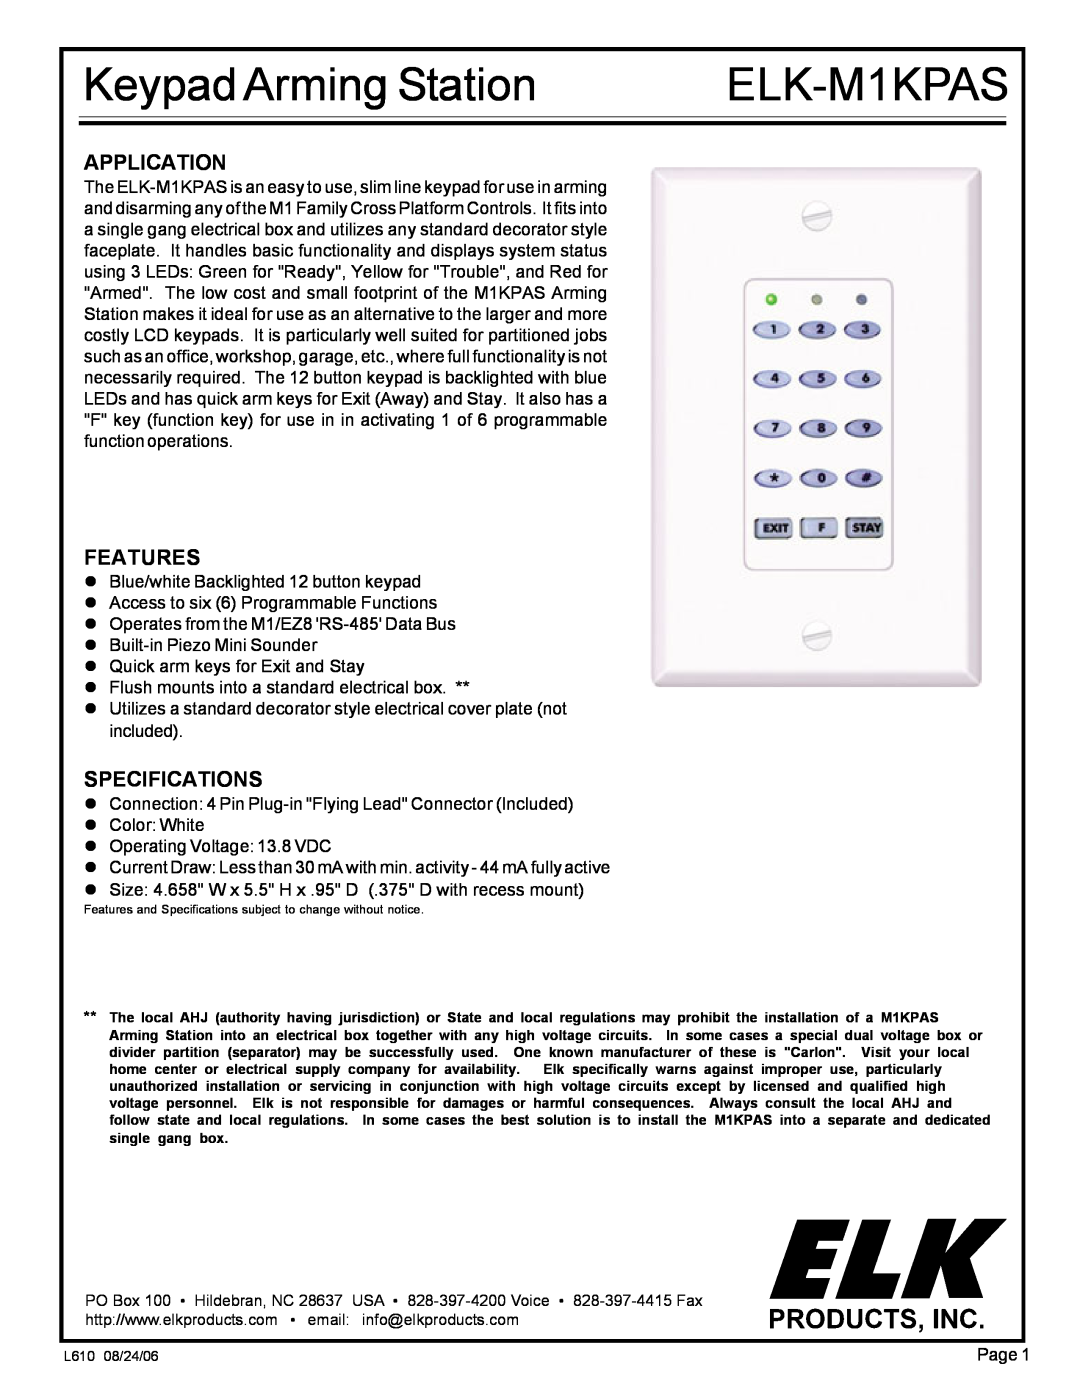 Elk specifications Application, Features, Specifications, Keypad Arming Station, ELK-M1KPAS 